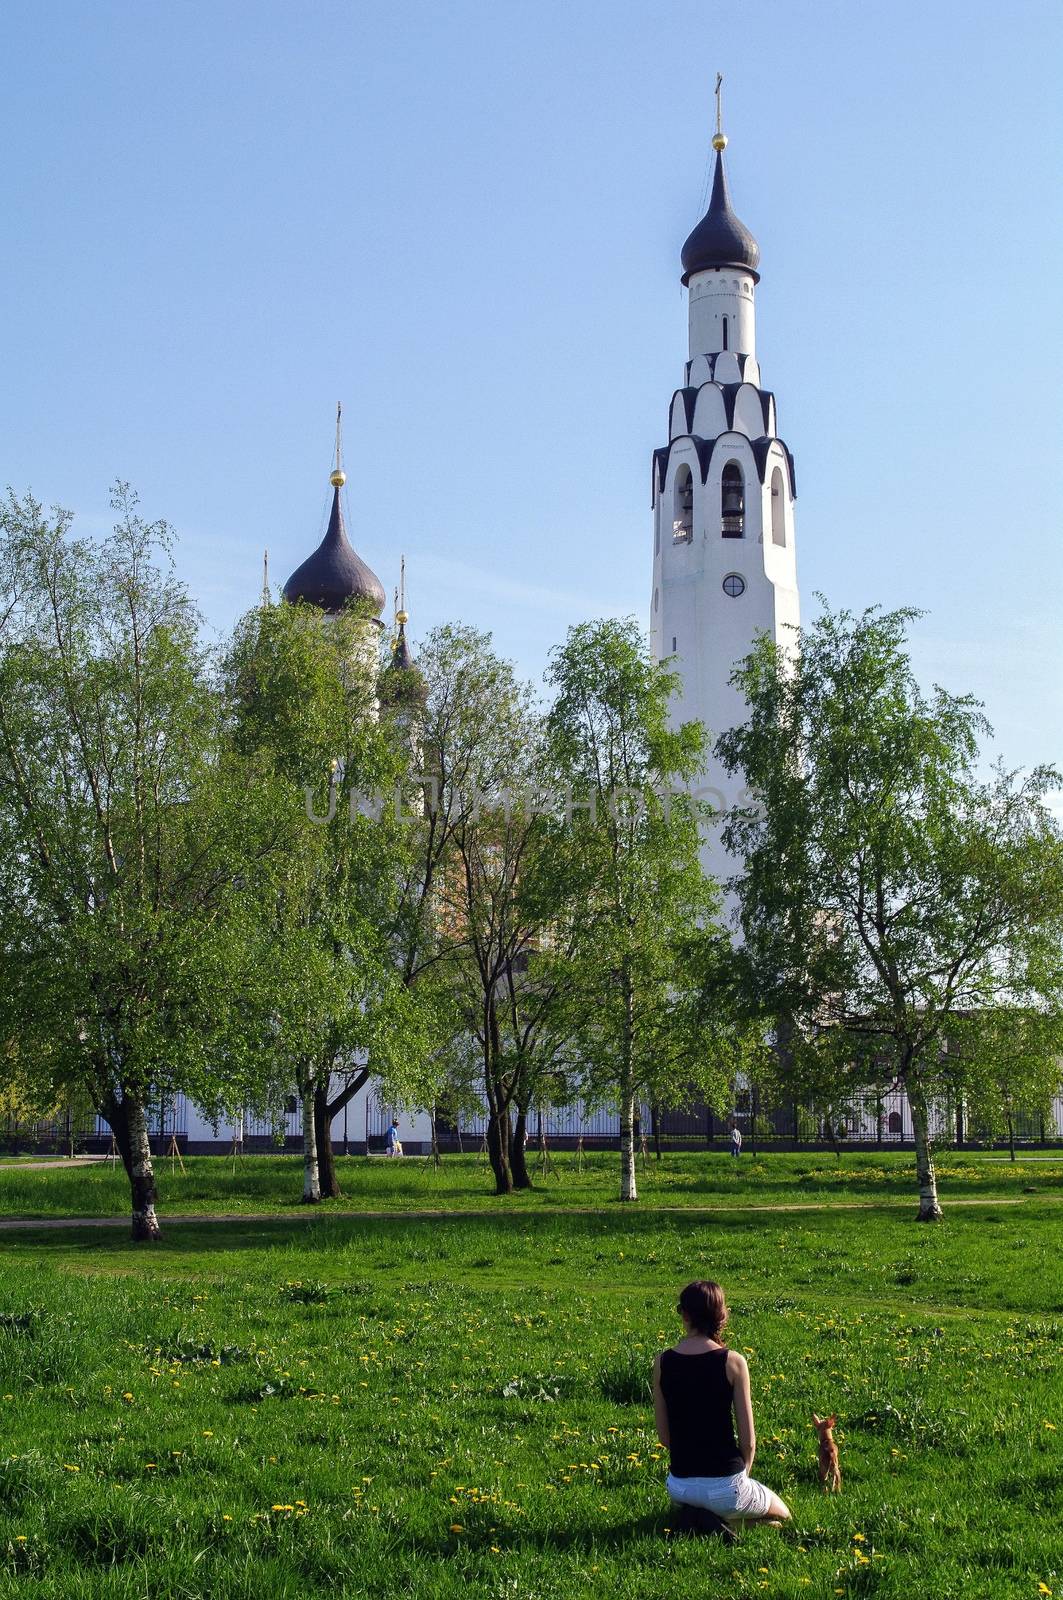 young woman with a small dog sitting on grass in the park and church in the background by evolutionnow